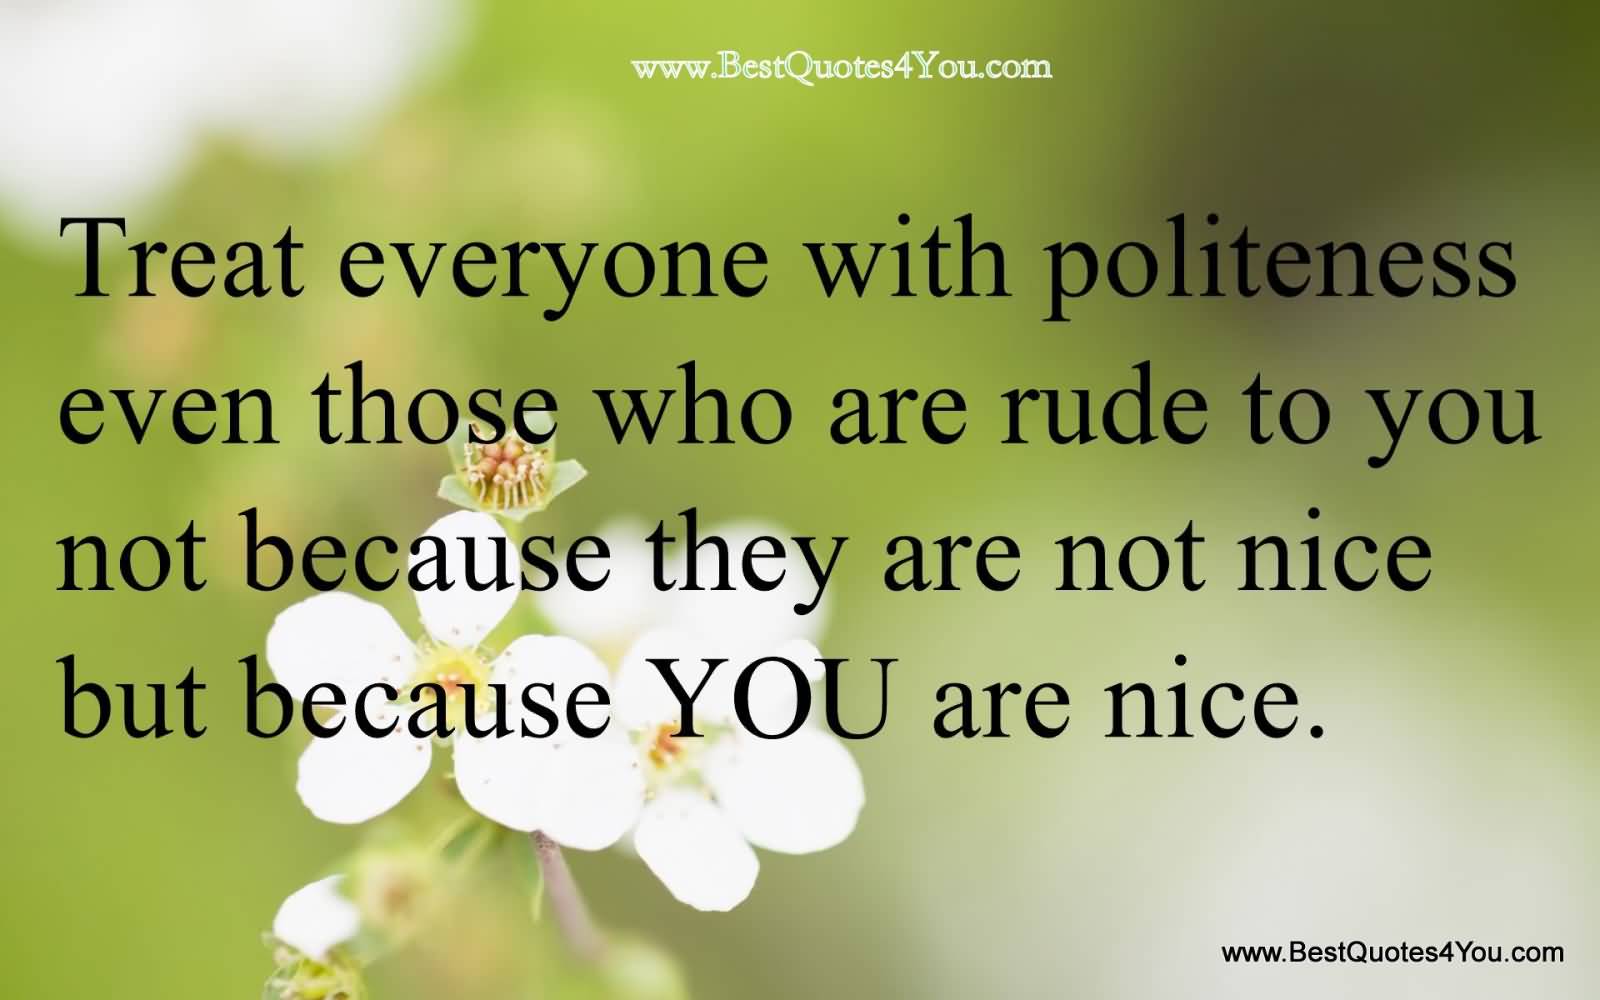 Treat everyone with politeness, even those who are rude to you - not because they are nice, but because you are nice